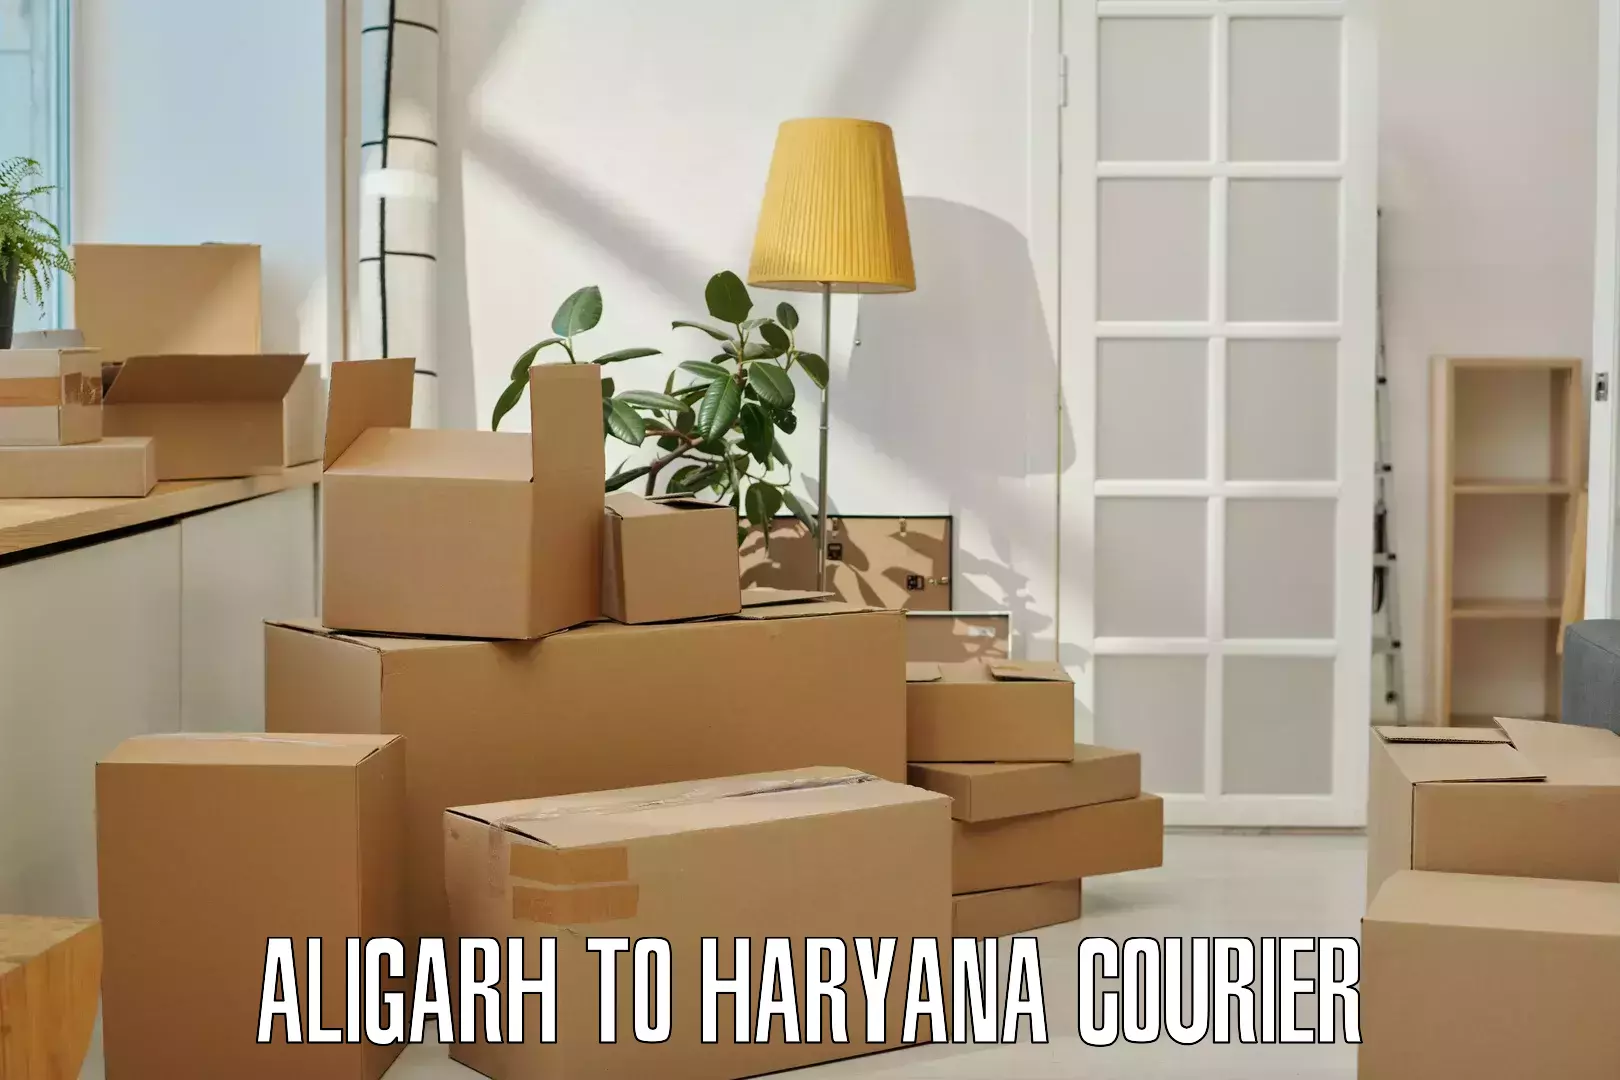 End-to-end delivery Aligarh to NCR Haryana